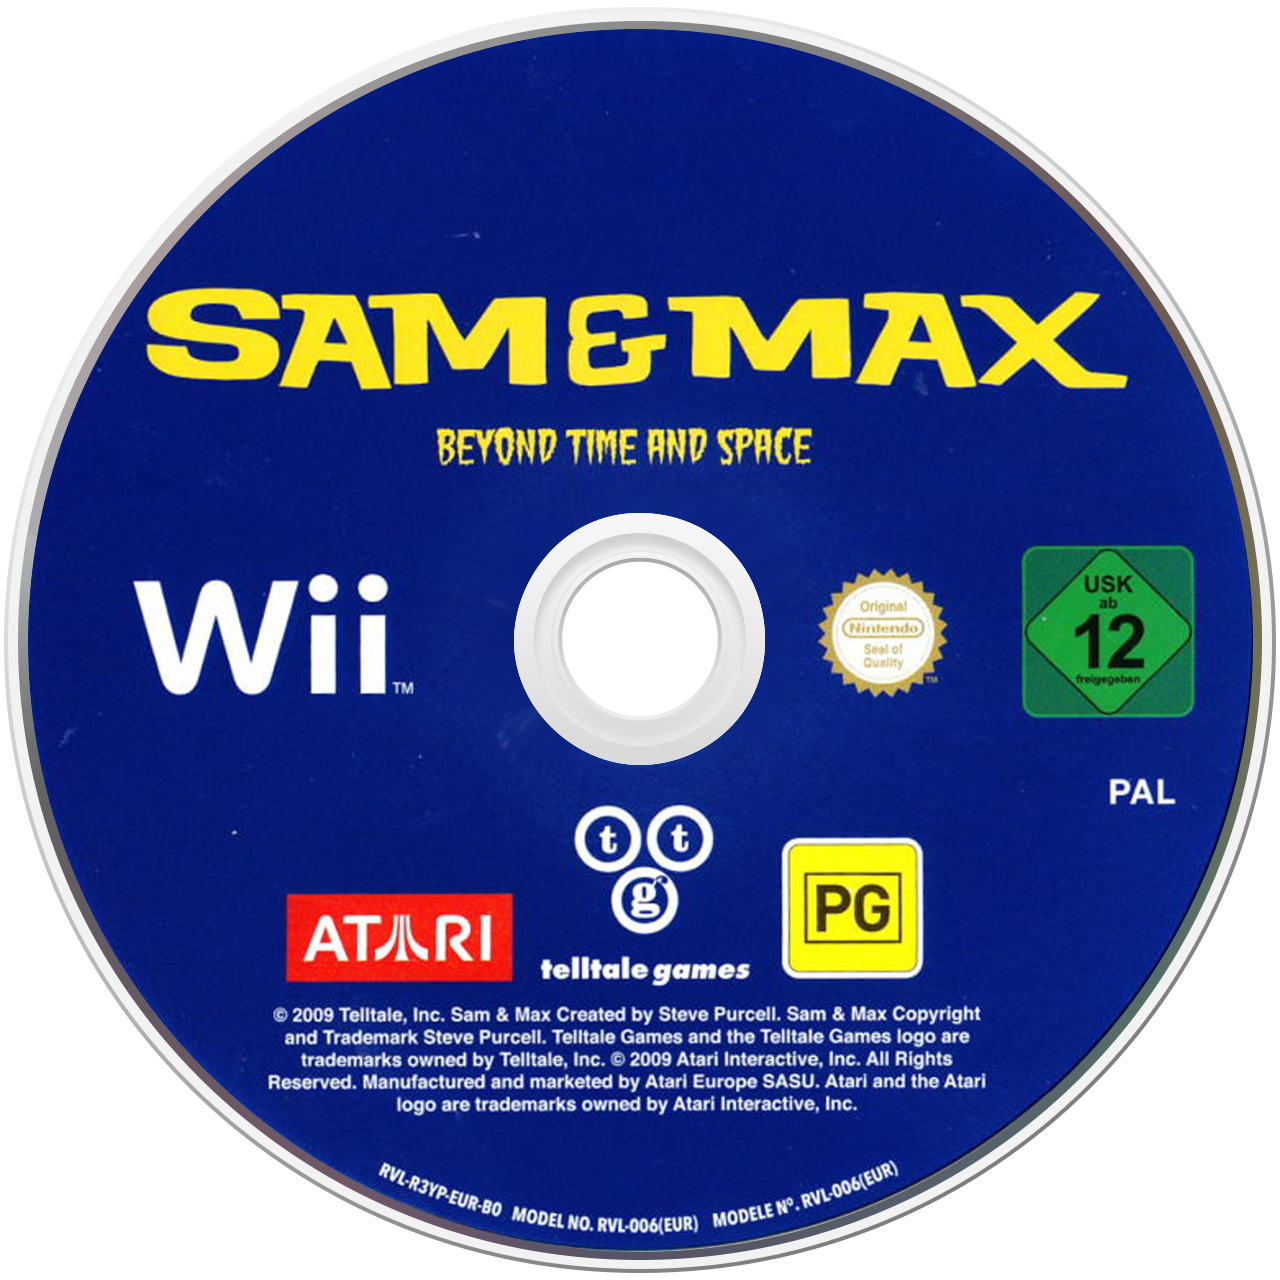 sam-max-season-two-beyond-time-and-space-images-launchbox-games-database